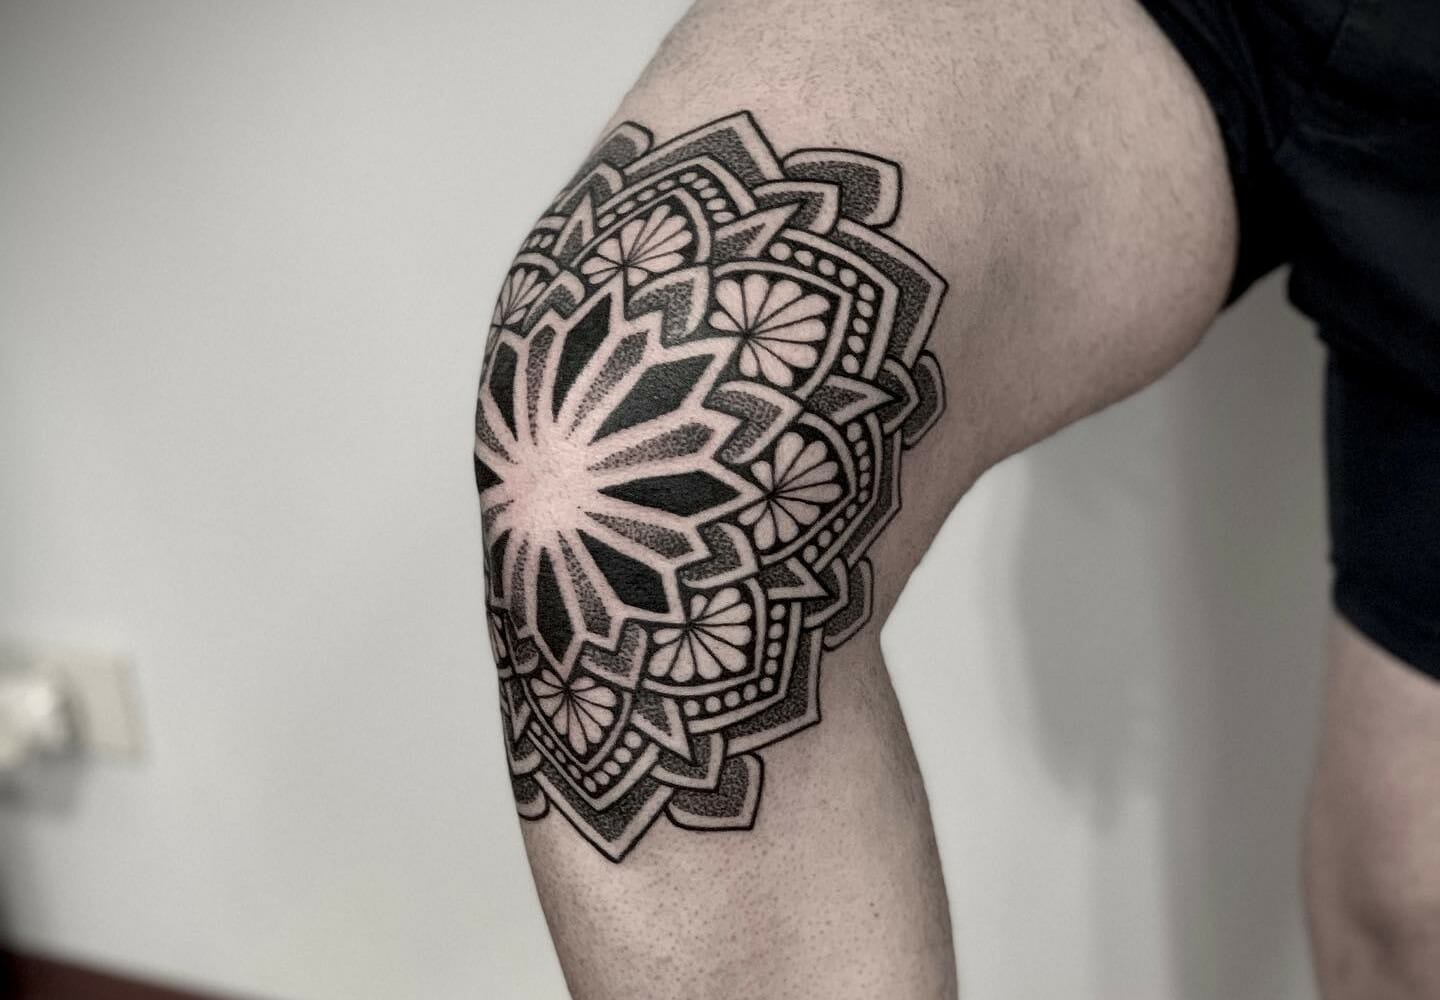 101 Best Knee Mandala Tattoo Ideas That Will Blow Your Mind! - Outsons